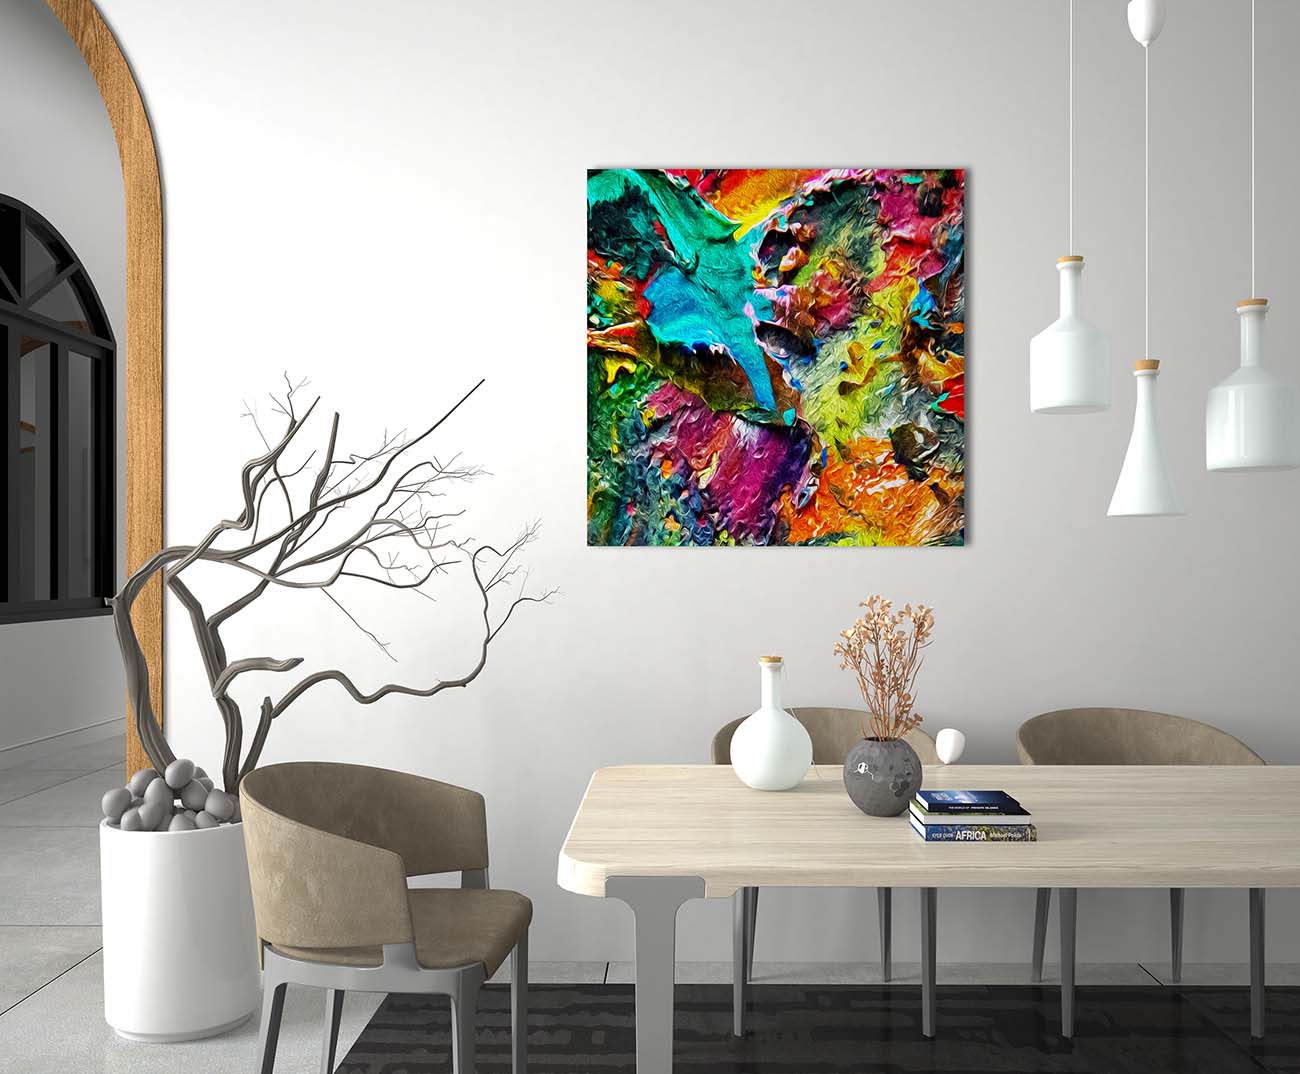 Watermelon Taffy Square 1 abstract art by Doug LaRue on a dining room wall